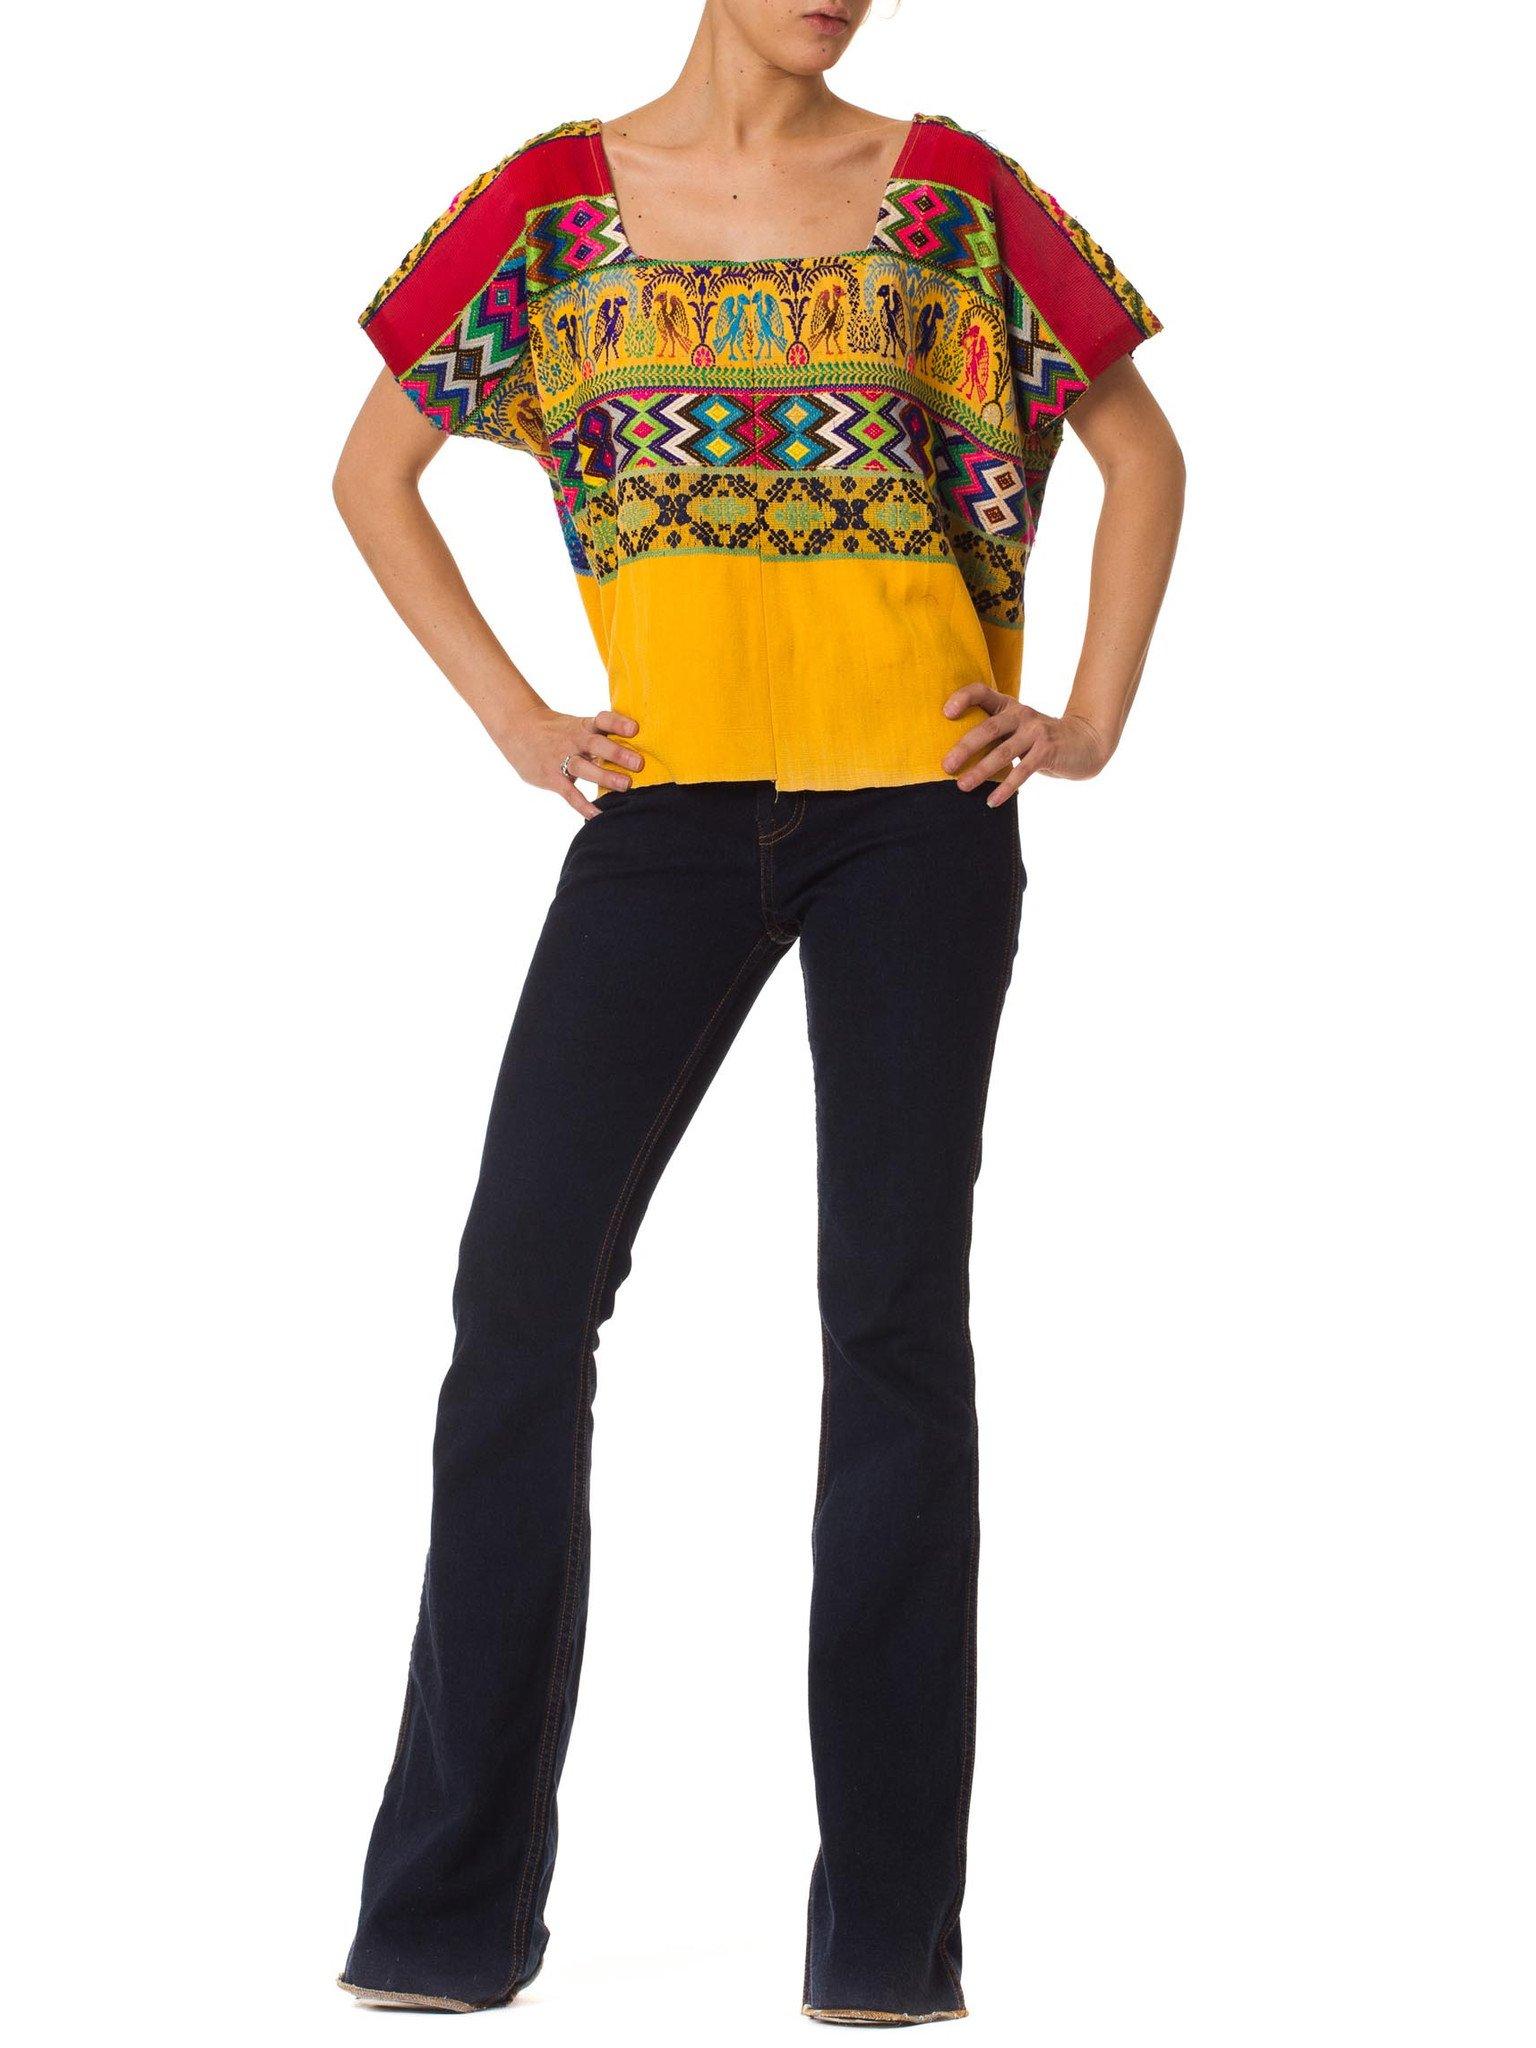 1970S Red & Yellow Cotton Top With Geometric Ethnic Hand Embroidery For Sale 1